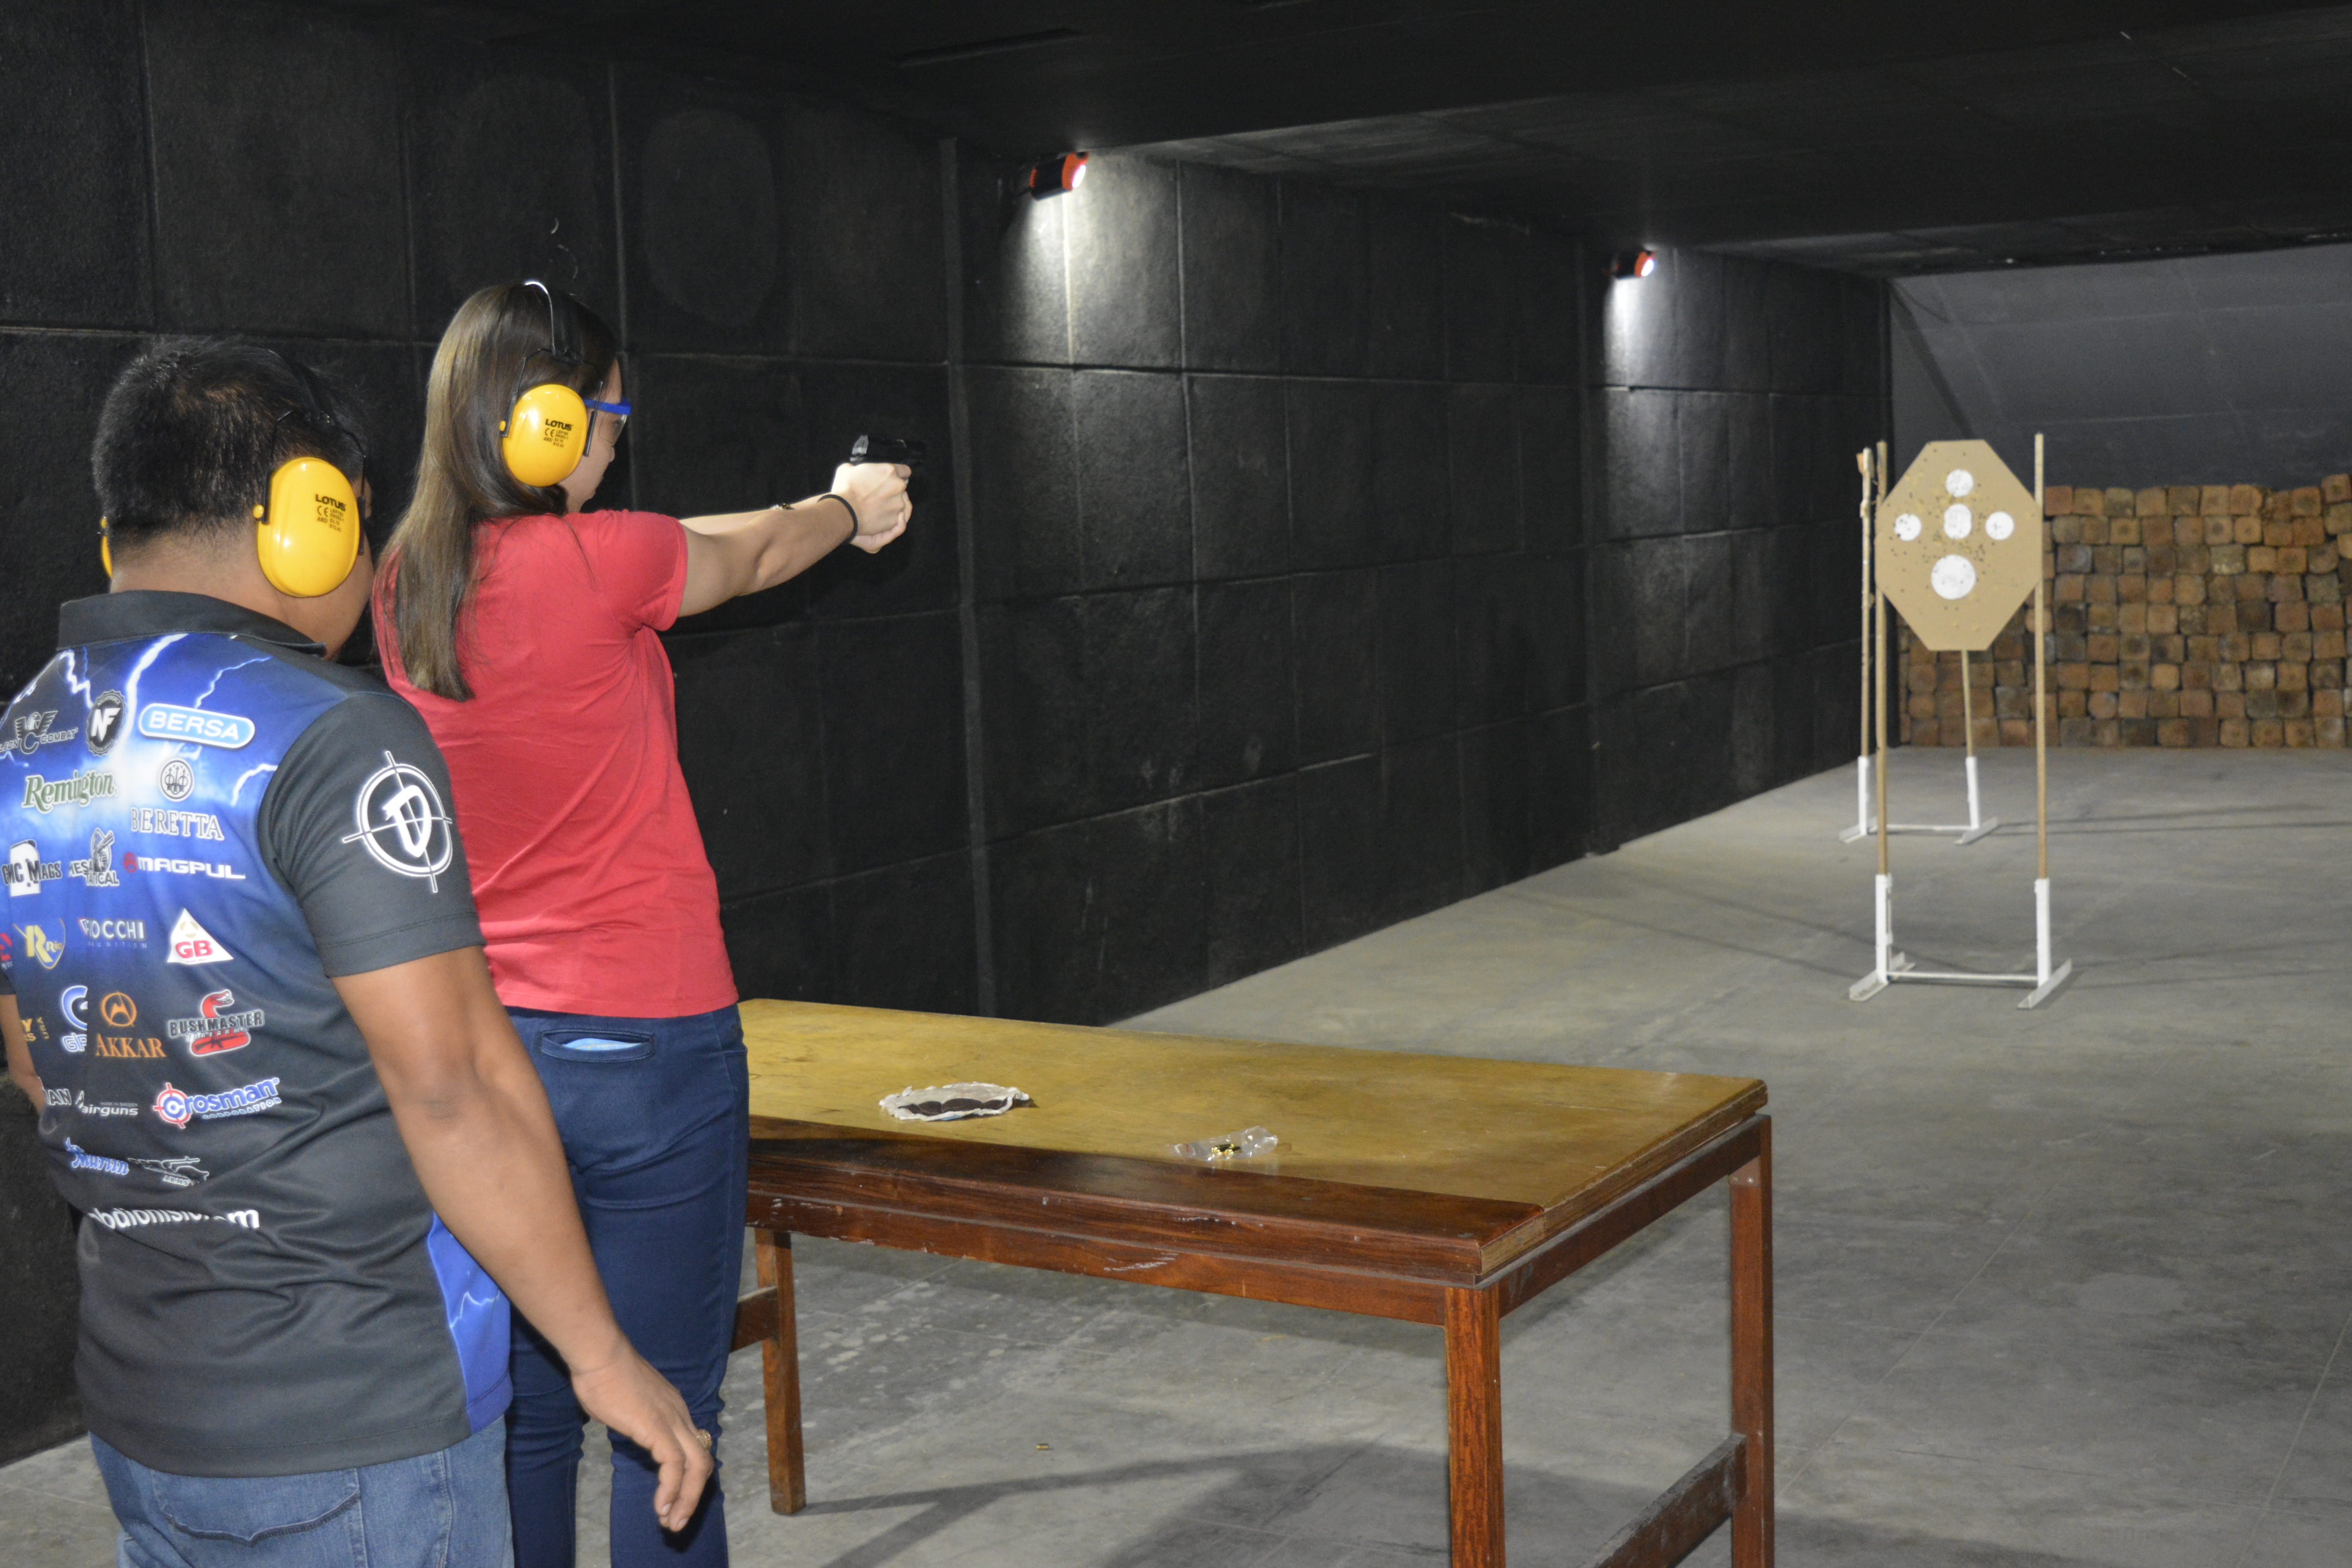 Be ready for some serious fun with our Indoor Shooting Range in Quezon City.